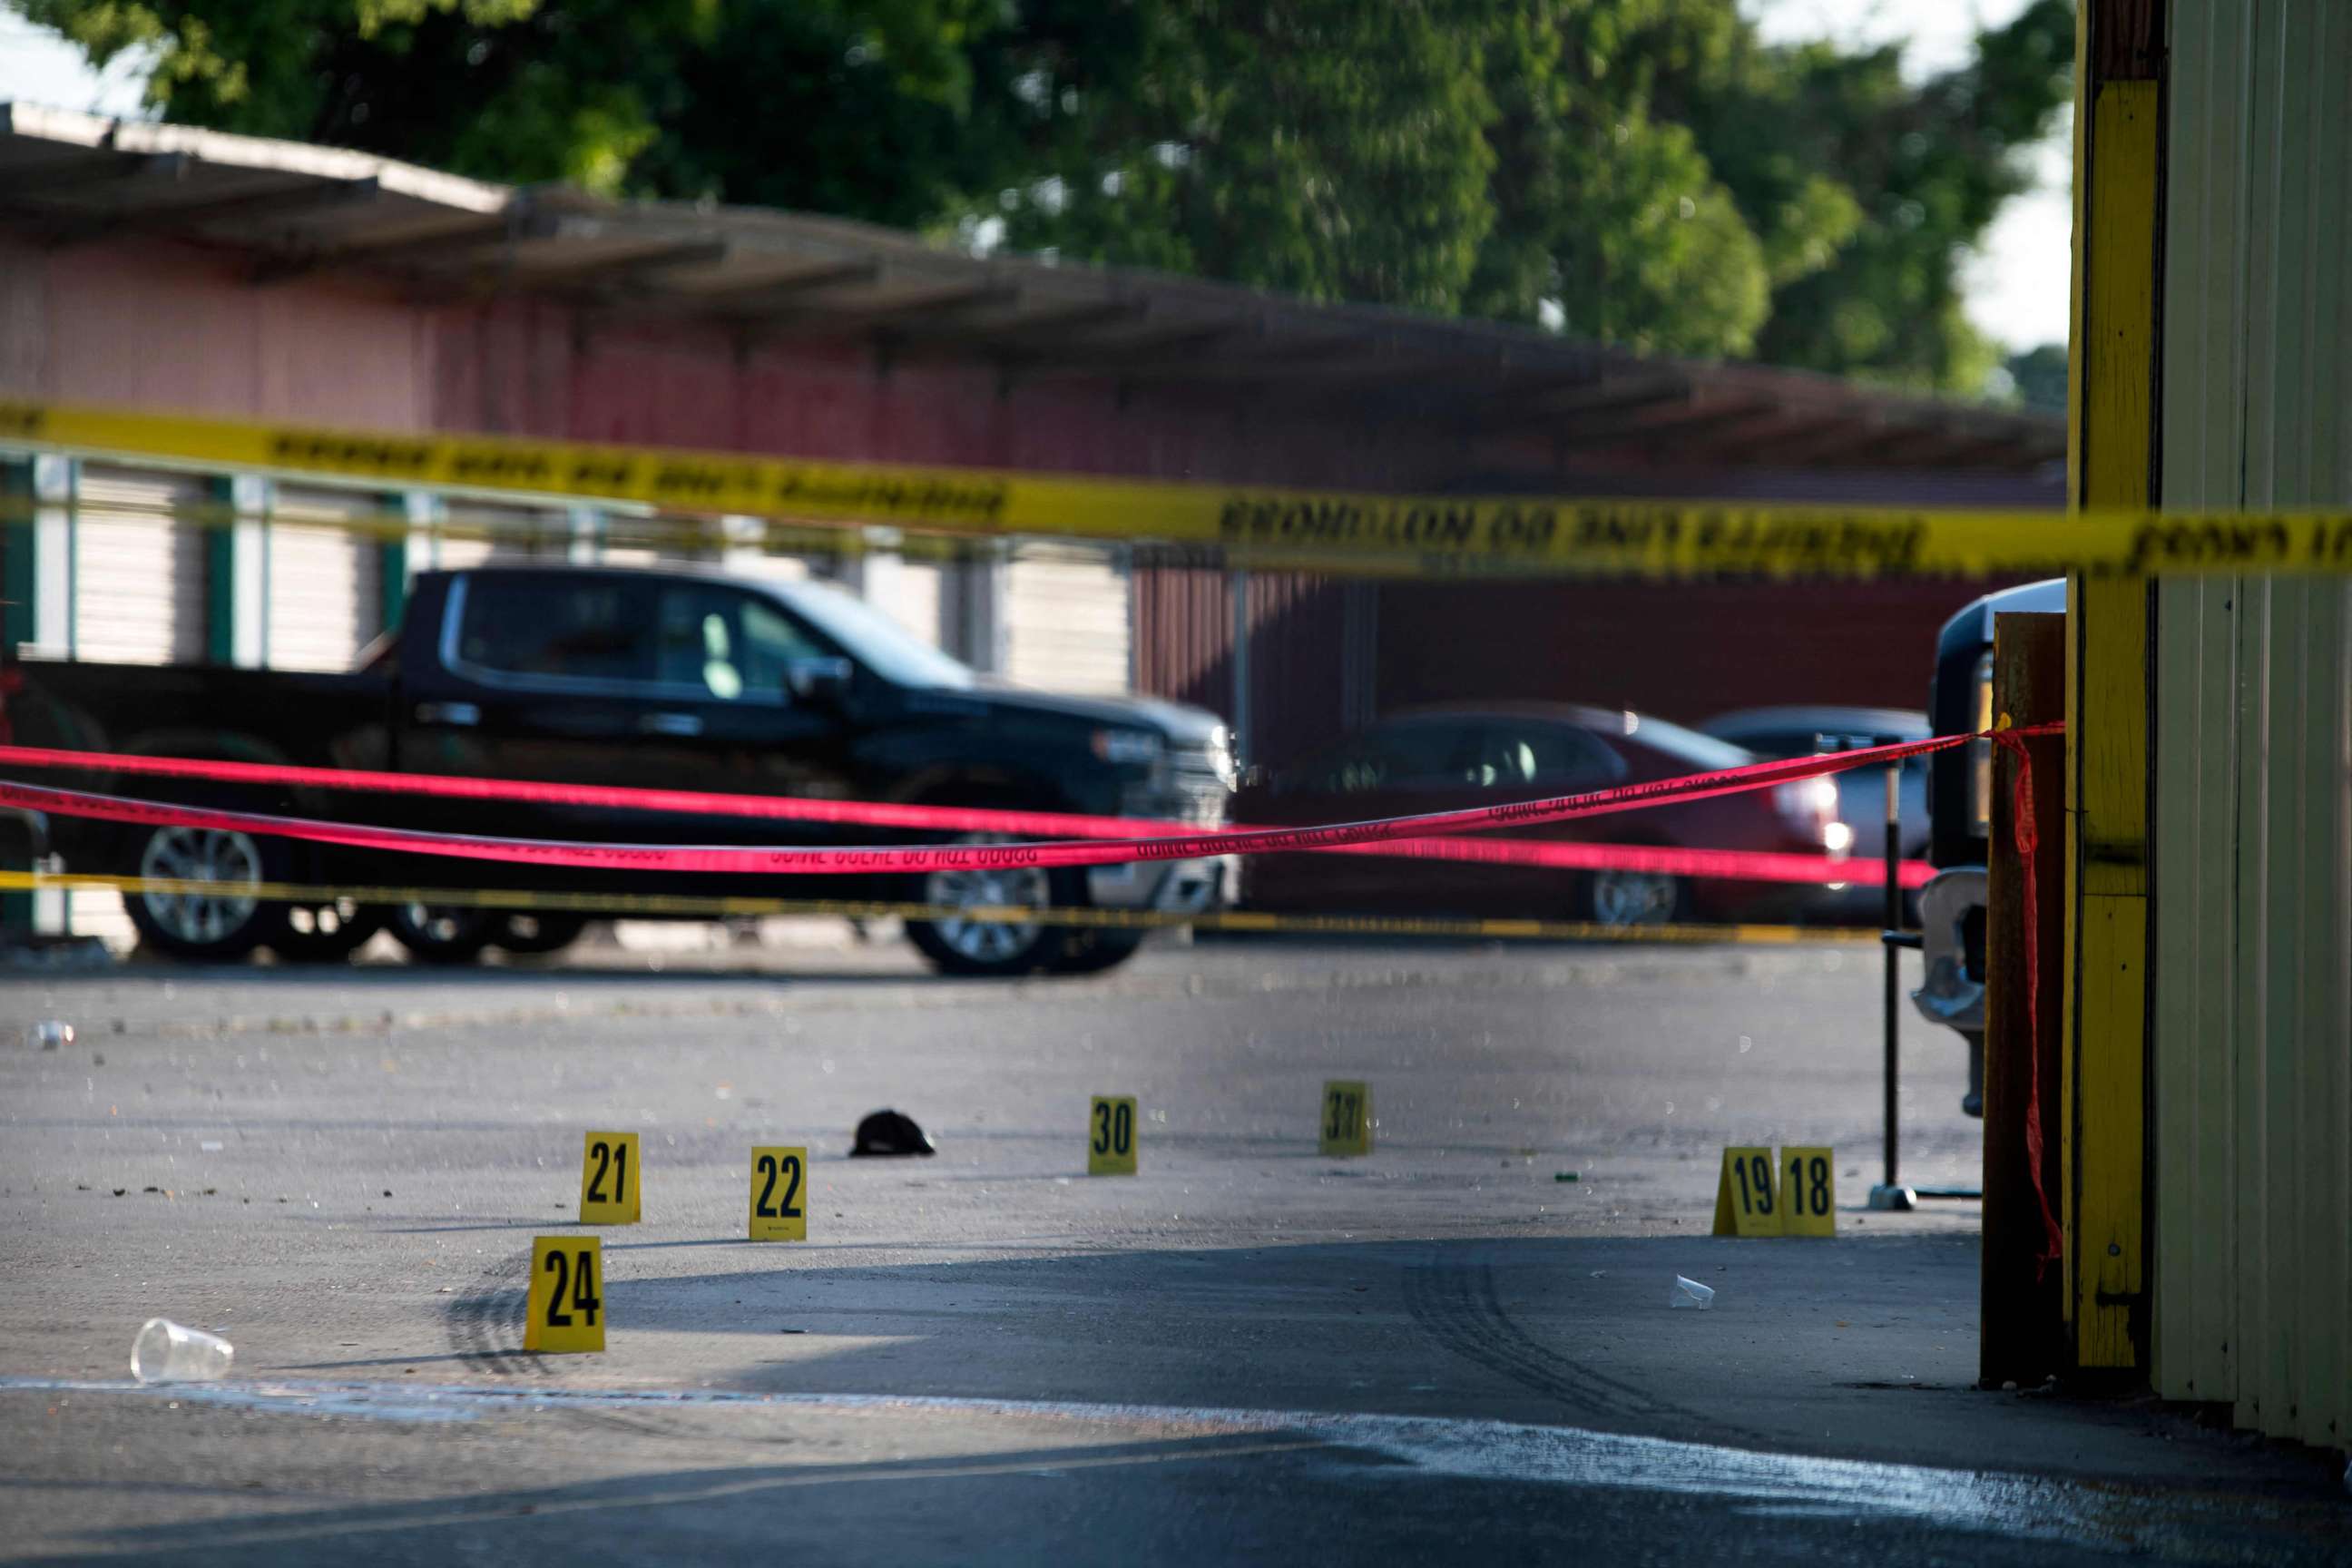 PHOTO: The scene of a shooting is pictured behind police yellow tape after two people were killed and three more critically injured in a shooting at a flea market in Houston, Texas on May 15, 2022.